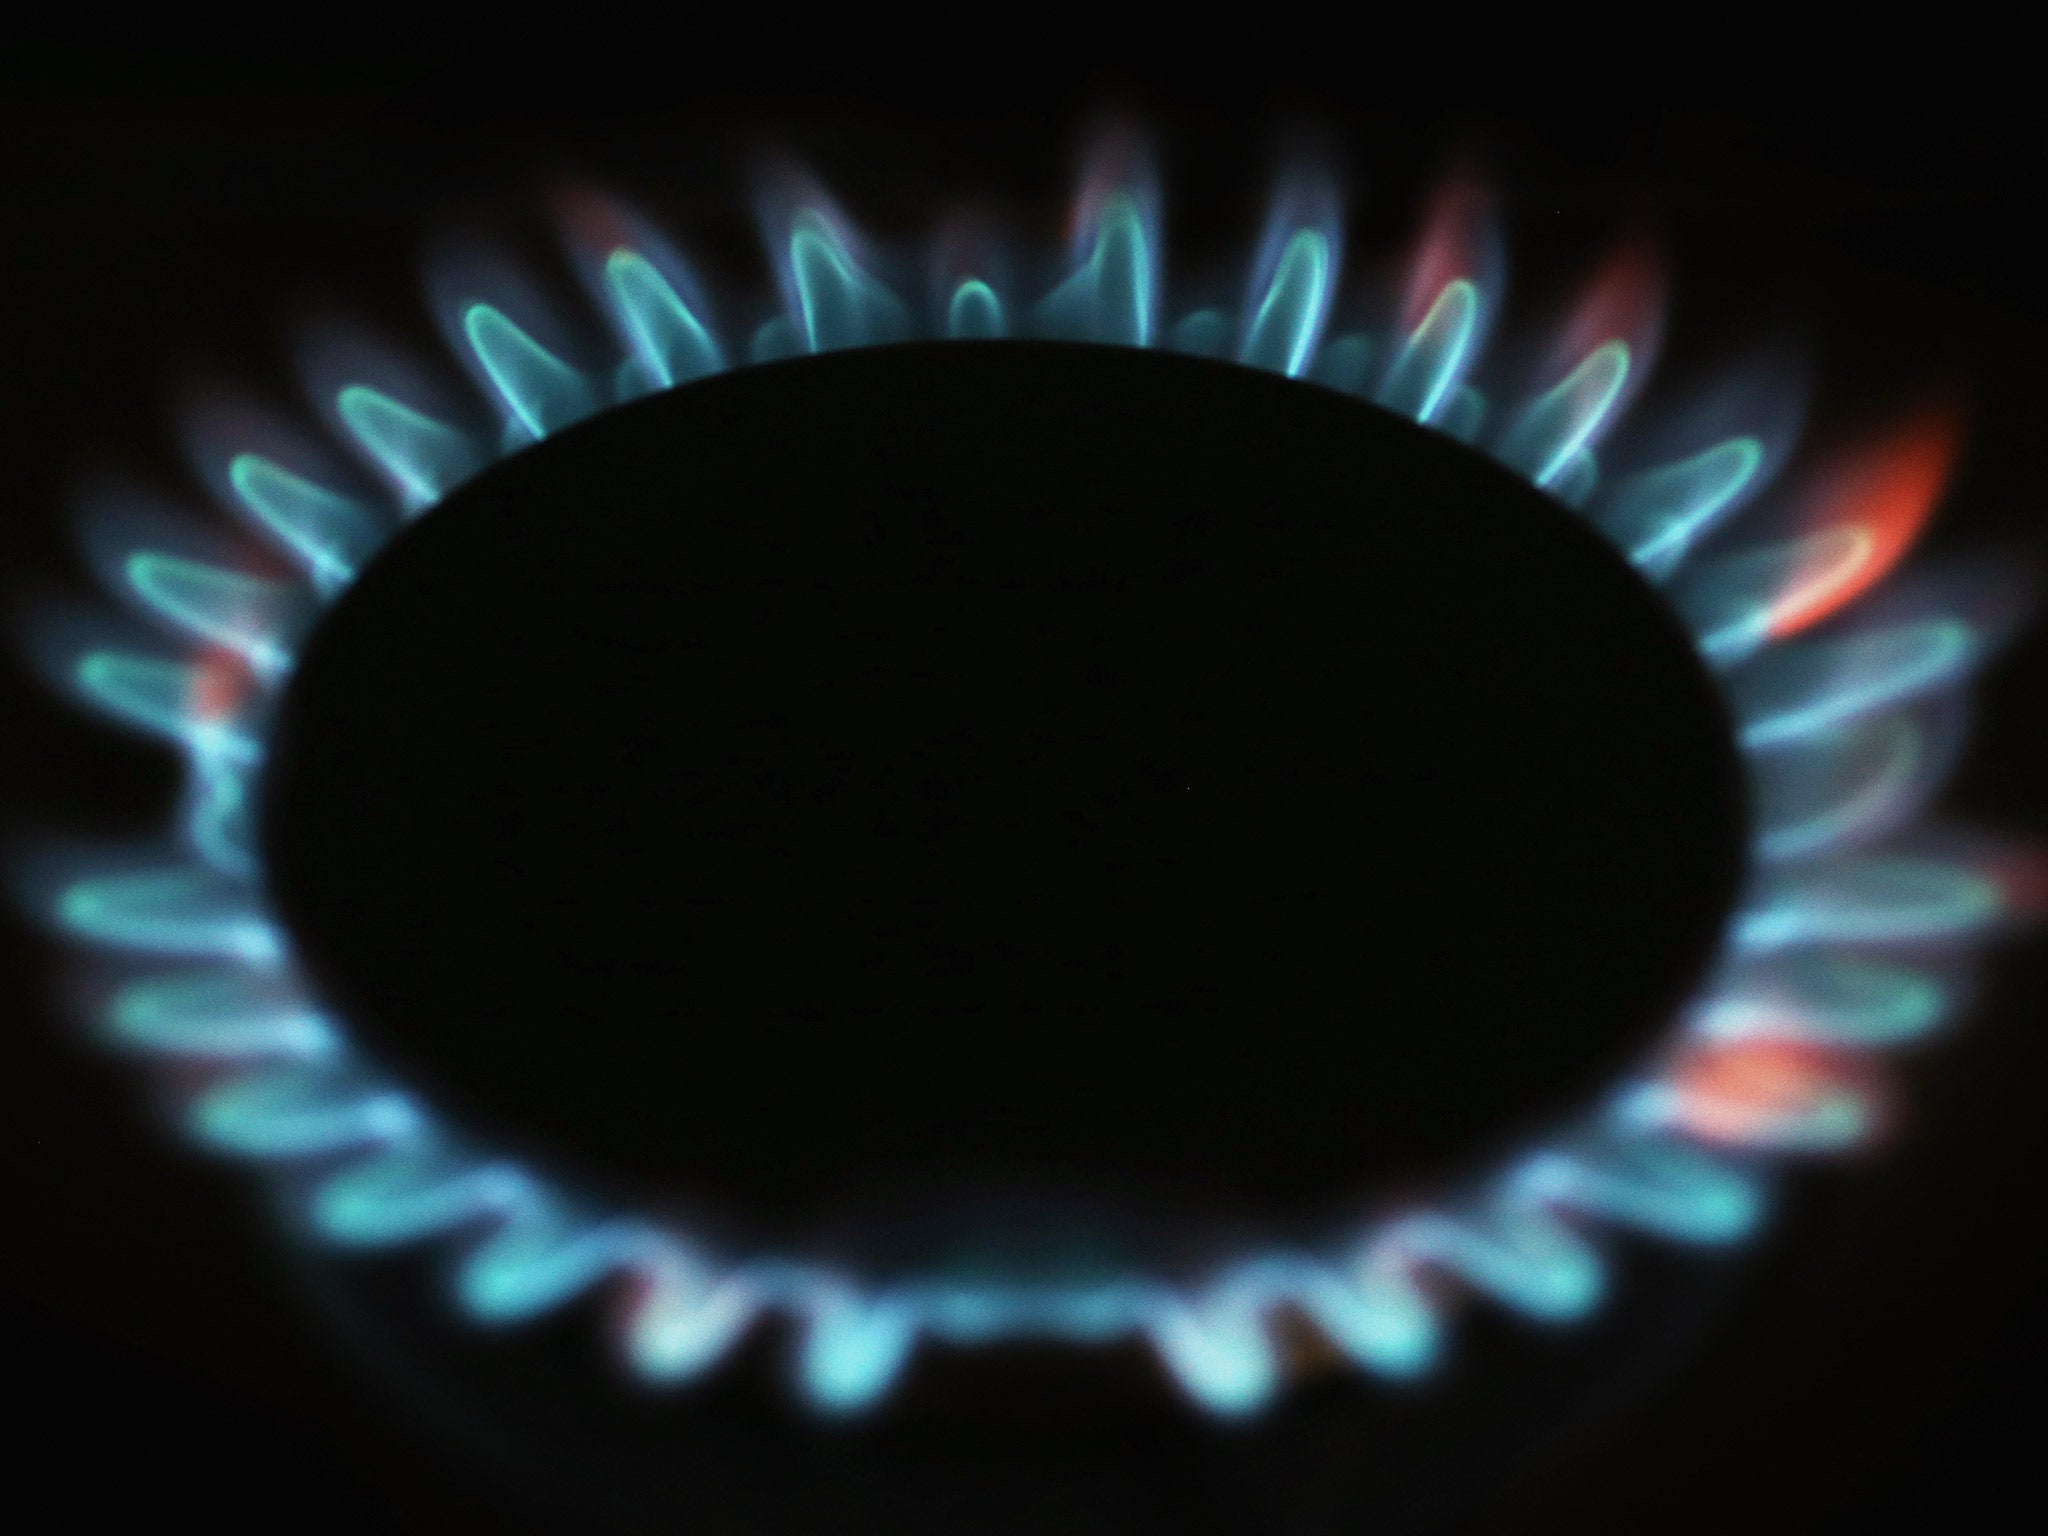 The gas bills of the lowest 10 per cent of households on the income scale increased by 53.3 per cent between 2010 and 2013